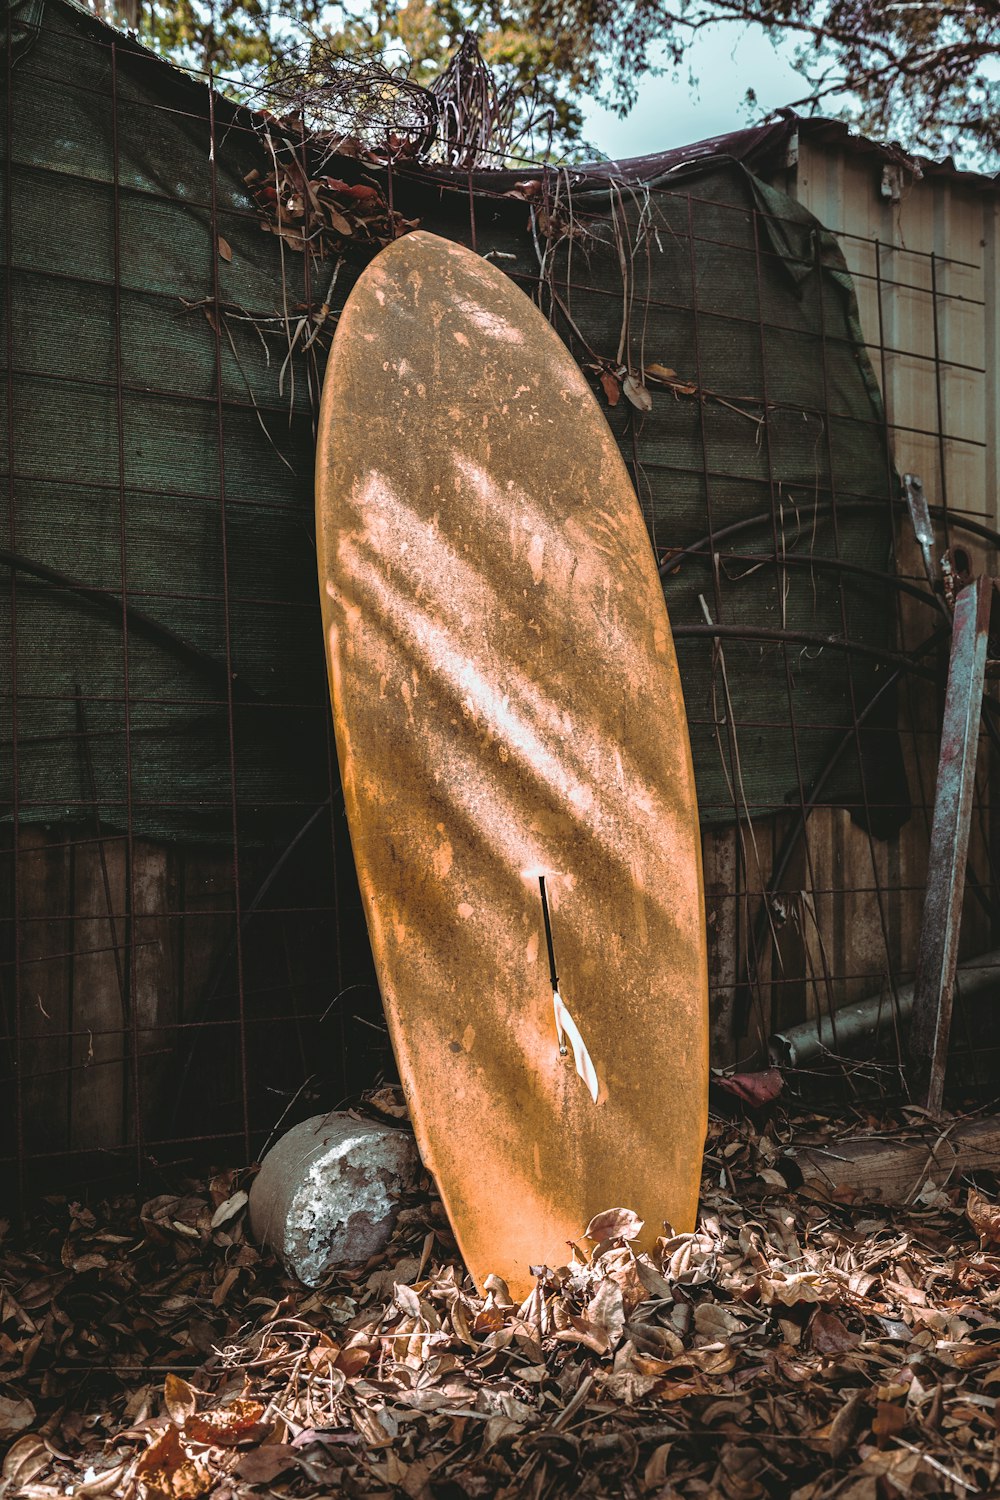 a rusted surfboard leaning against a fence